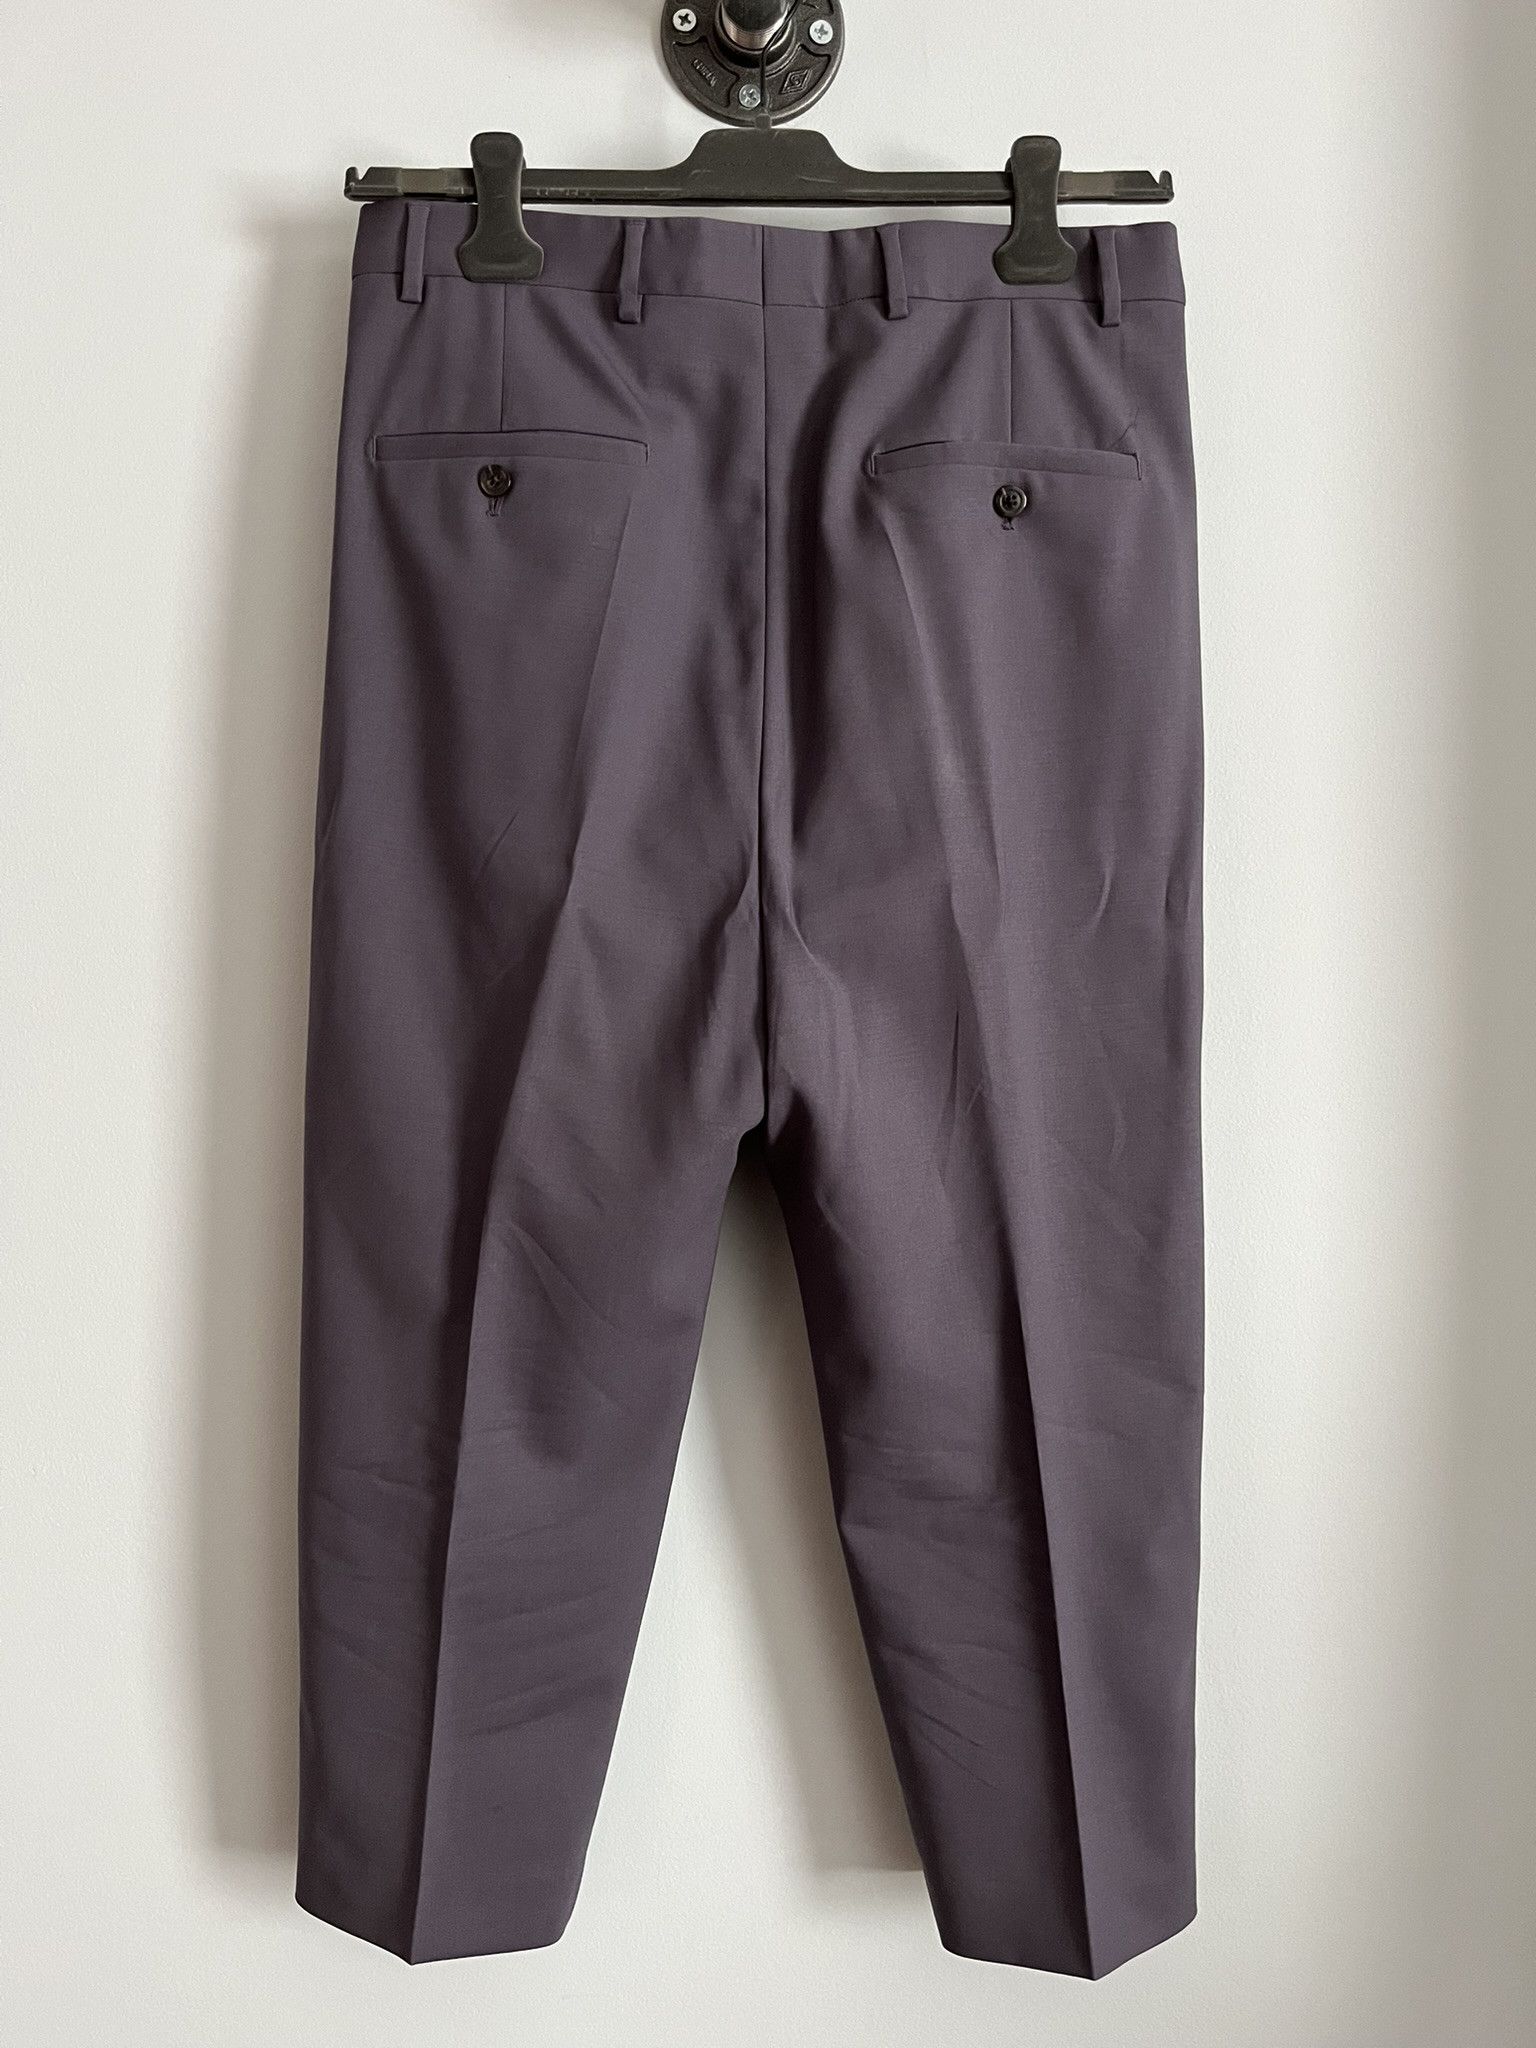 Rick Owens ASTAIRES CROPPED TROUSERS SIZE 46 | Grailed